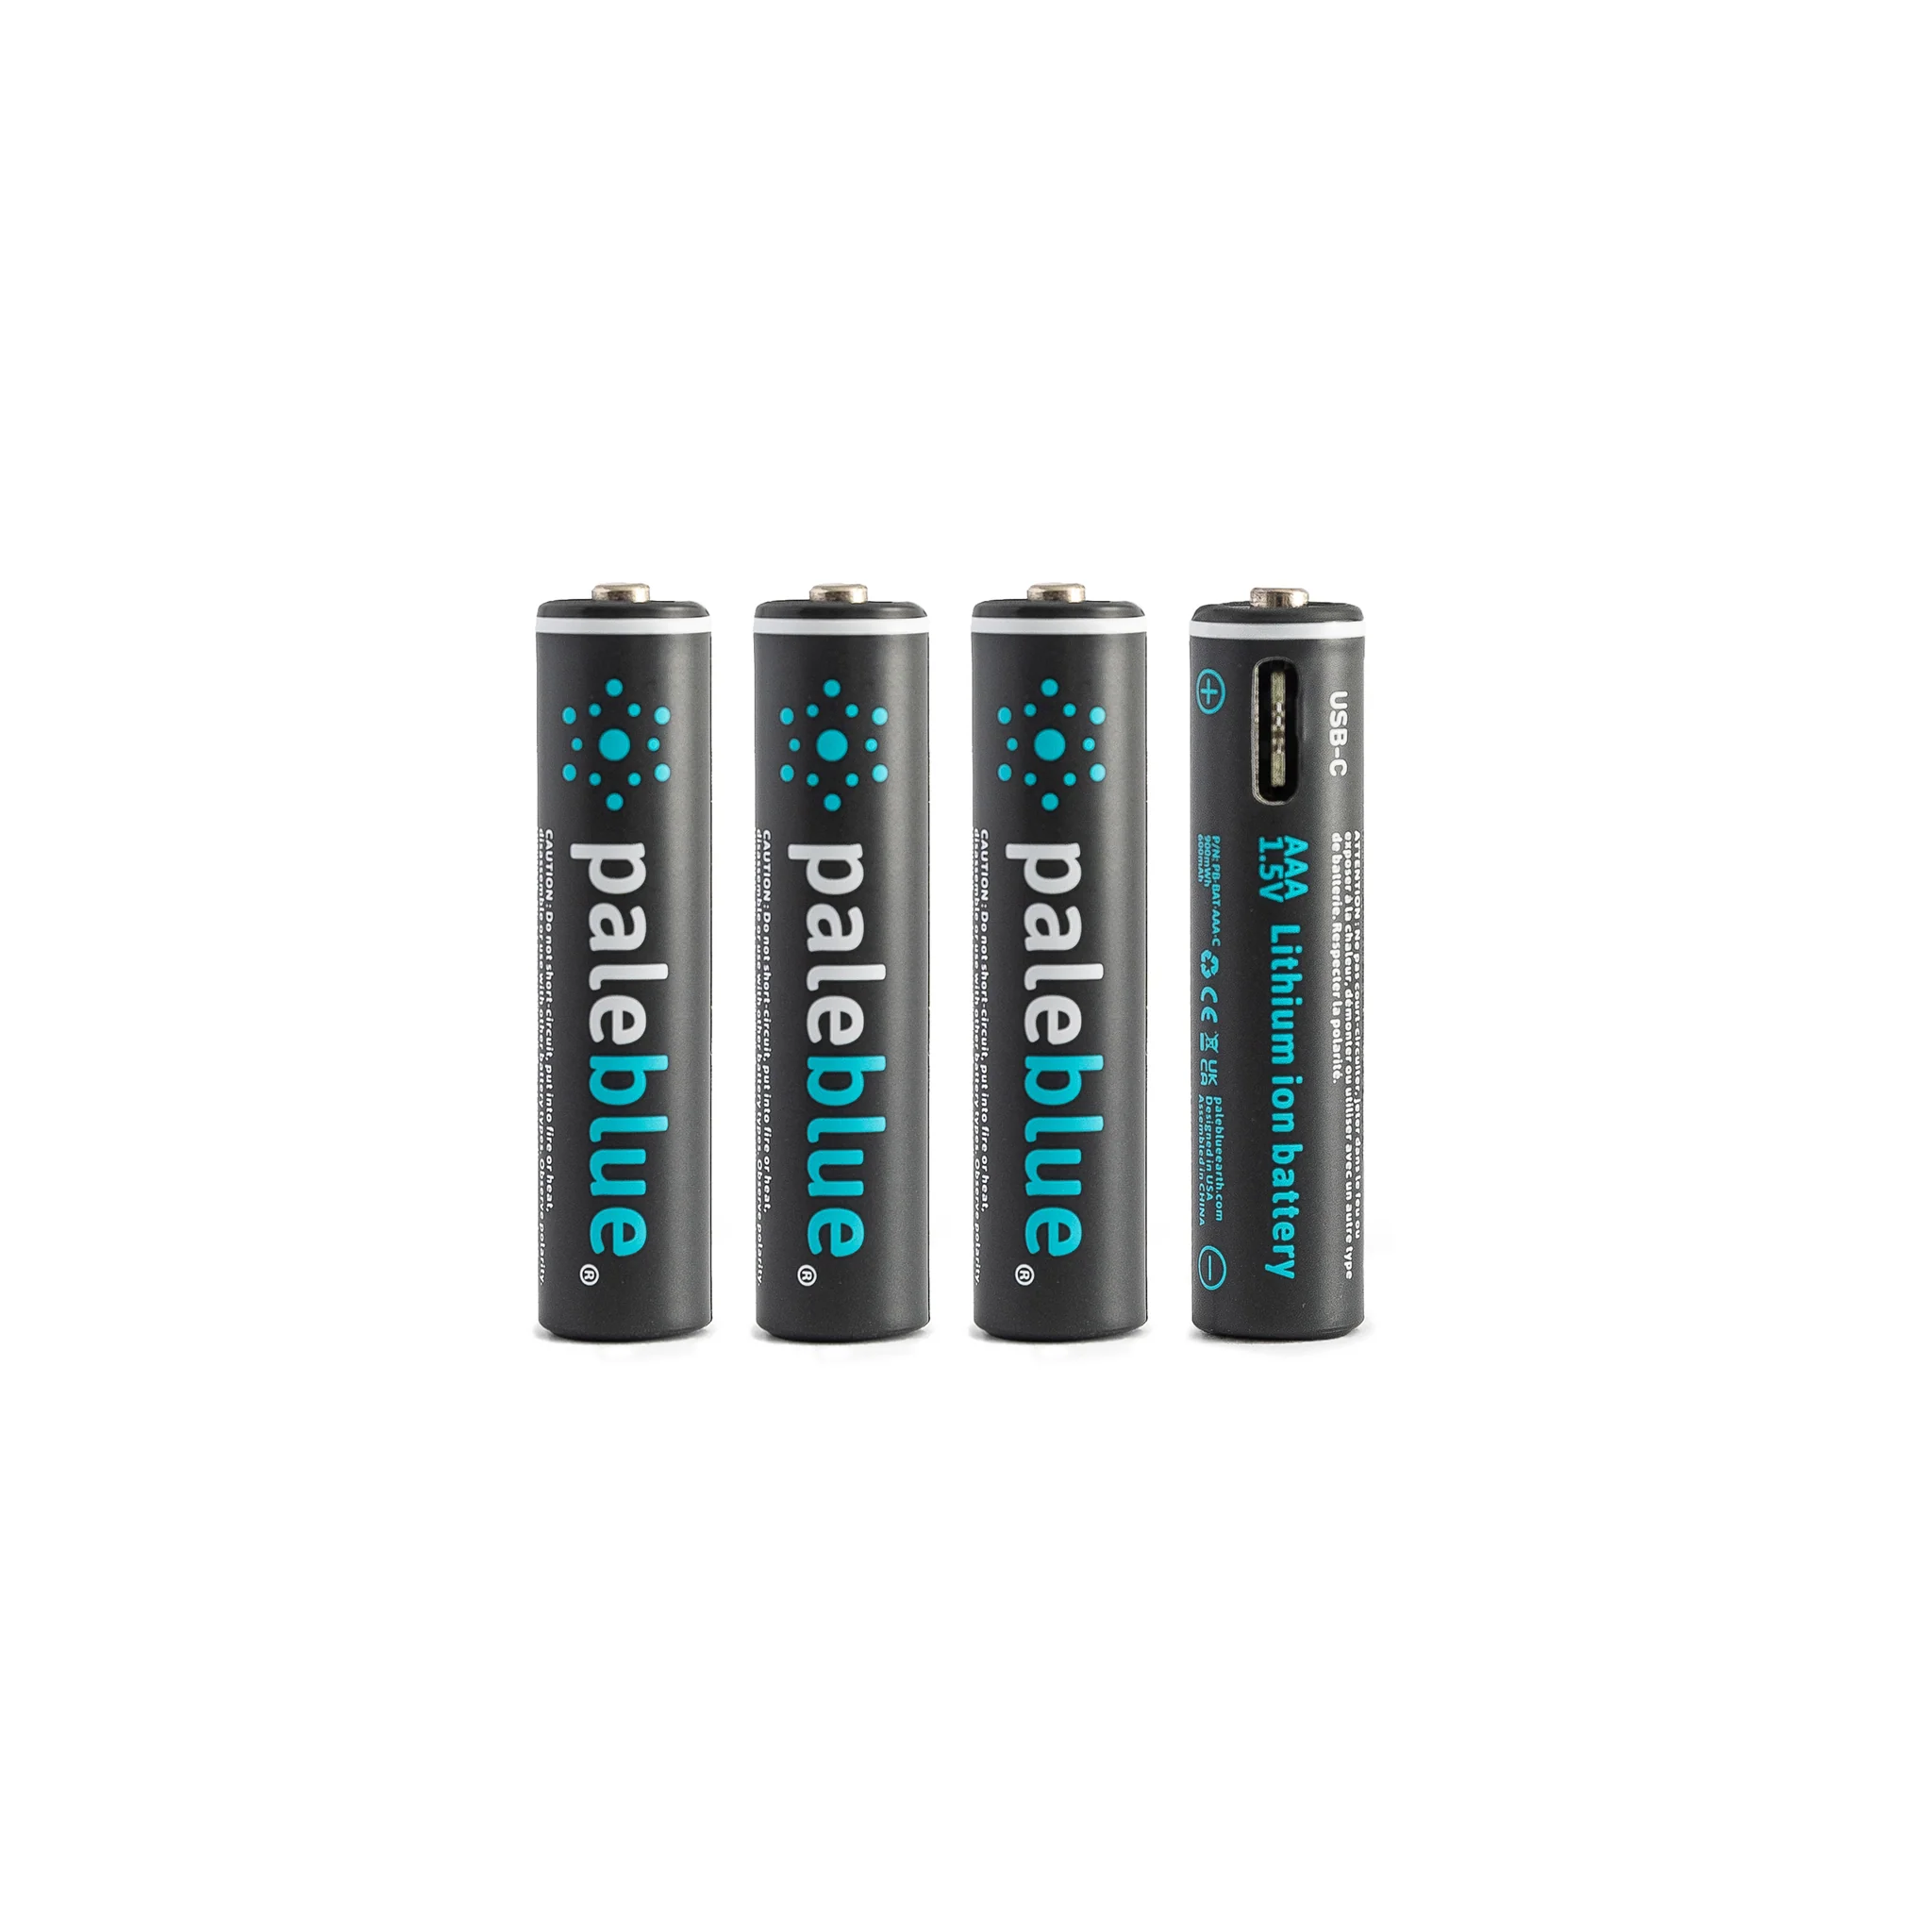 AAA USB-C Rechargeable Batteries - Pale Blue Earth Europe